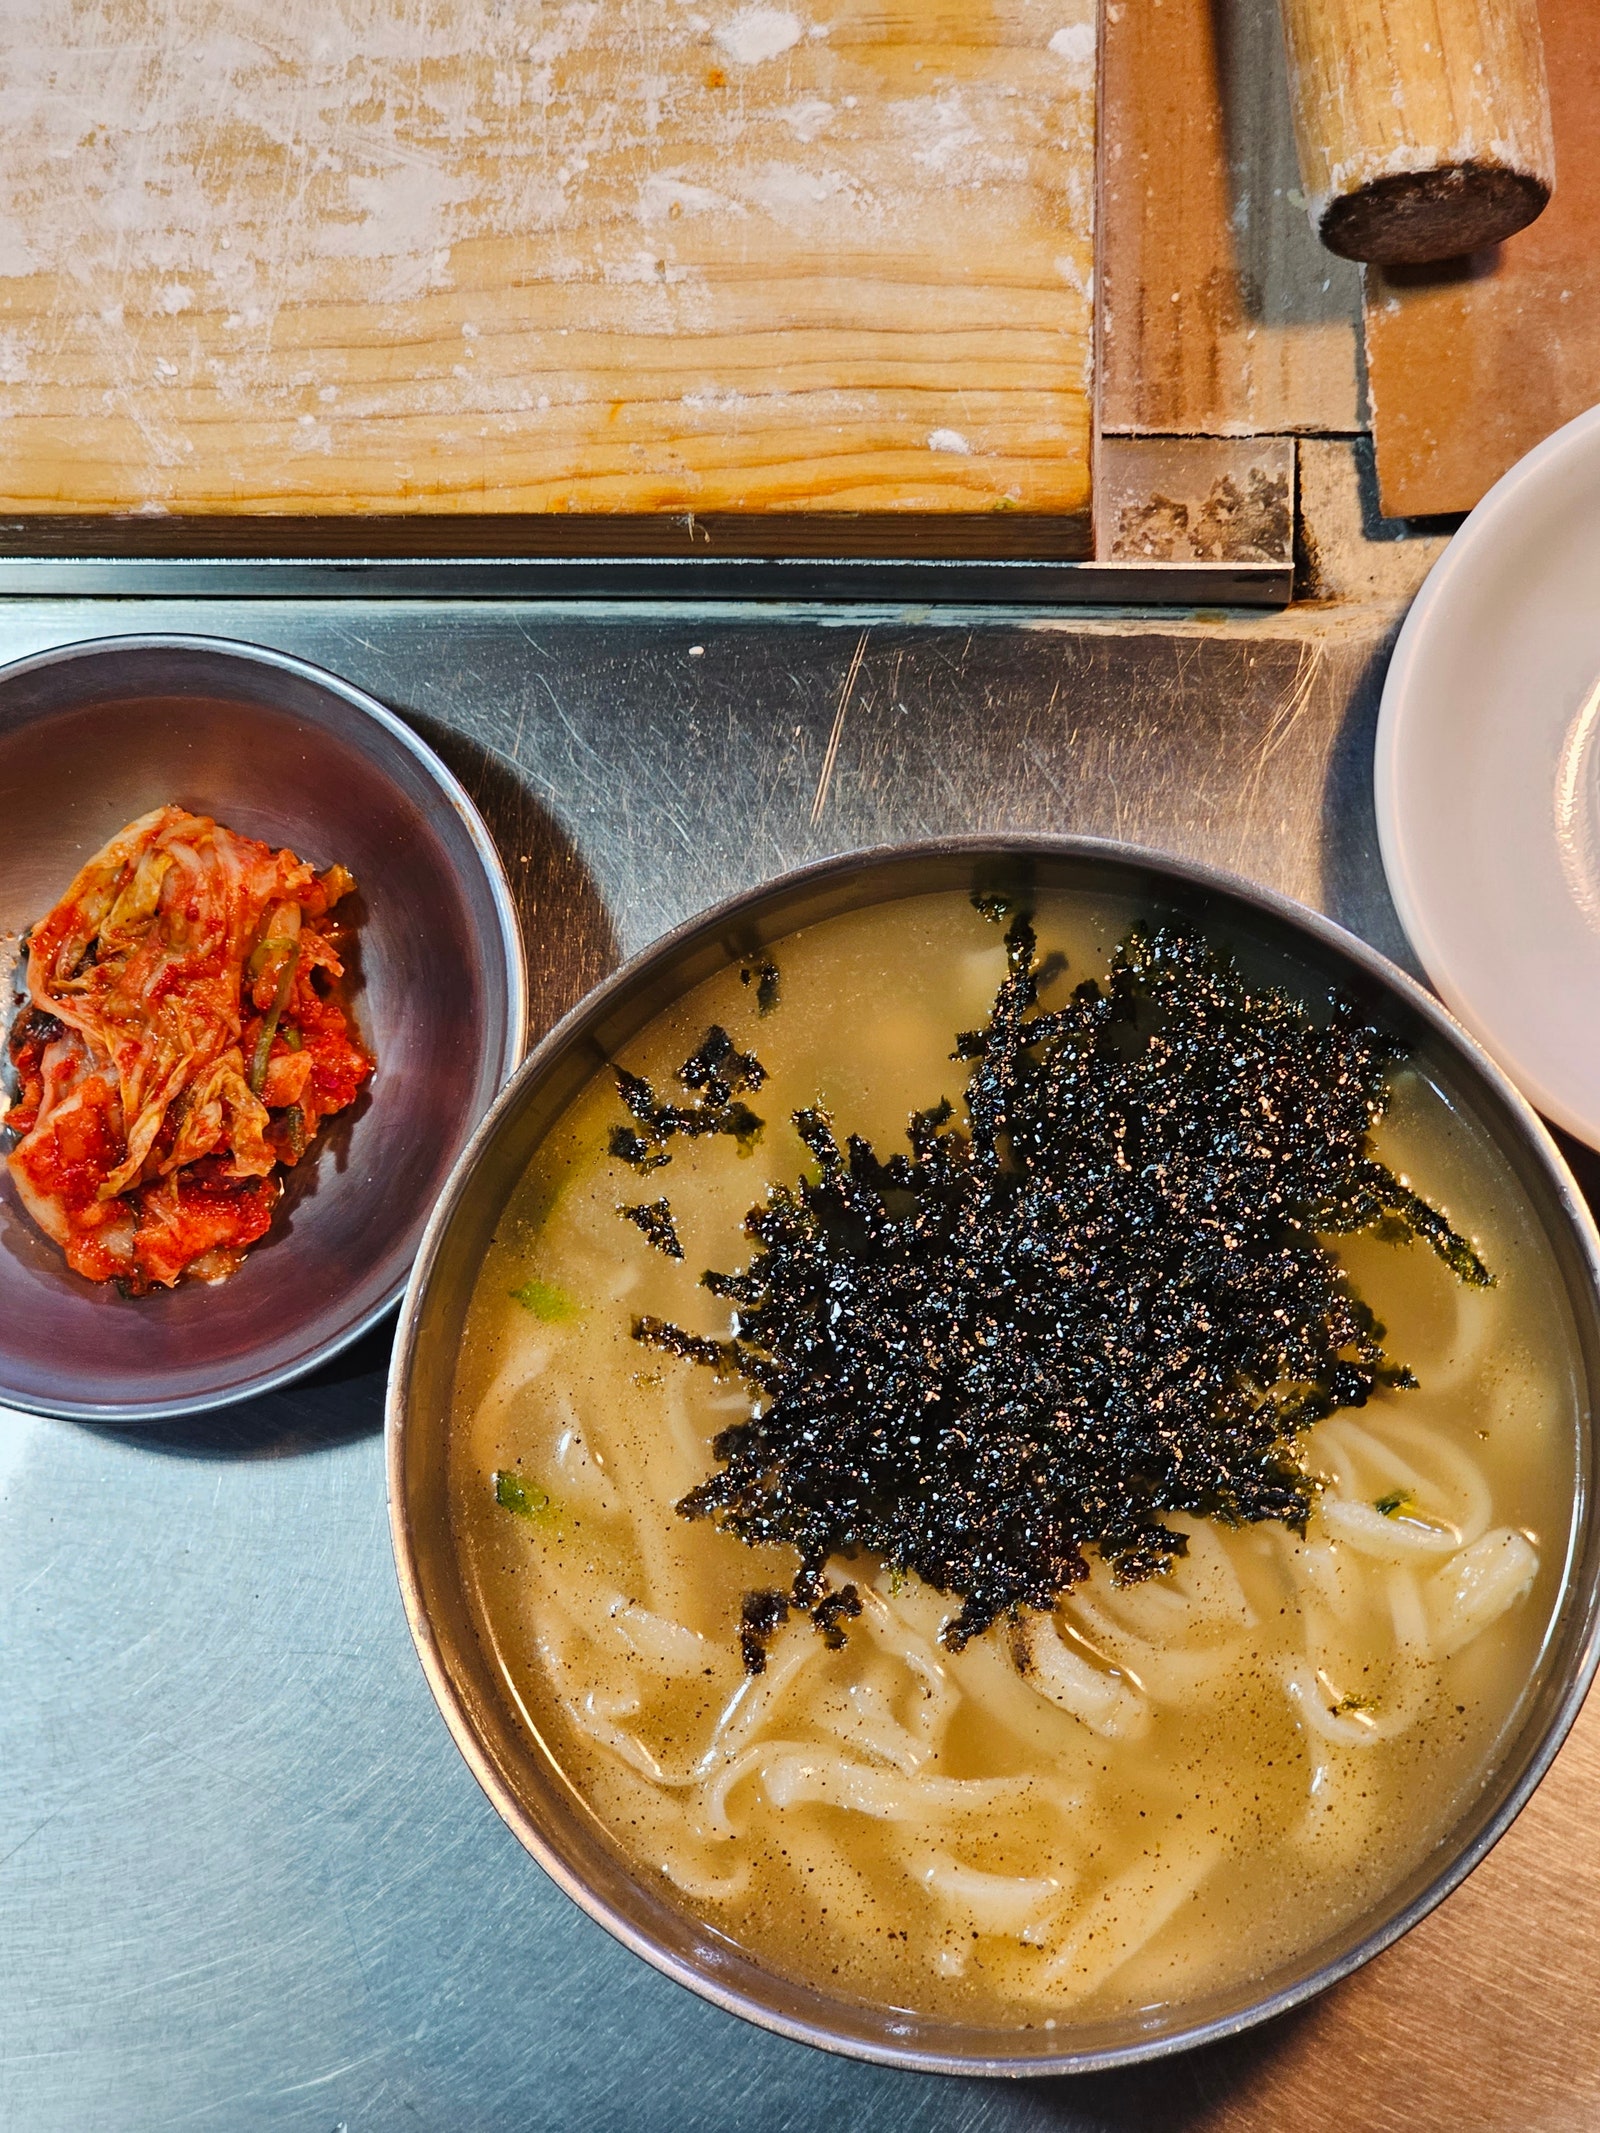 The famous Kalguksu knifecut noodles served with a side of kimchi at Cho Yonsoons stall in the Gwanjang market